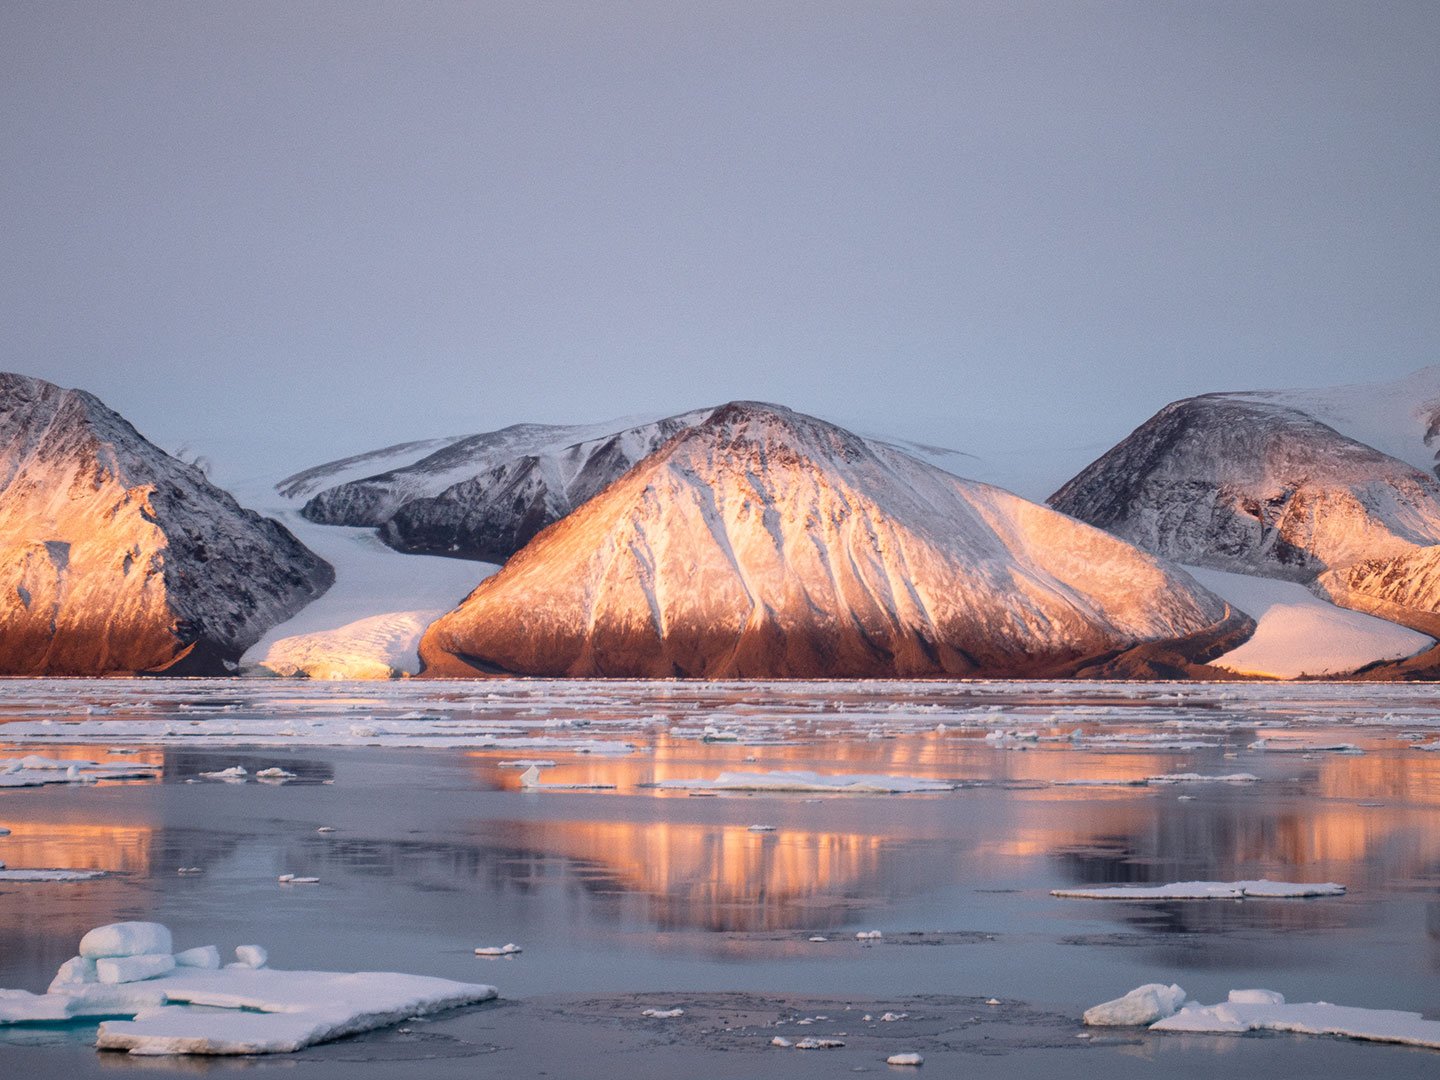 Stunning views of snow- and ice-covered landscapes are highlights of any cruise to Nunavut